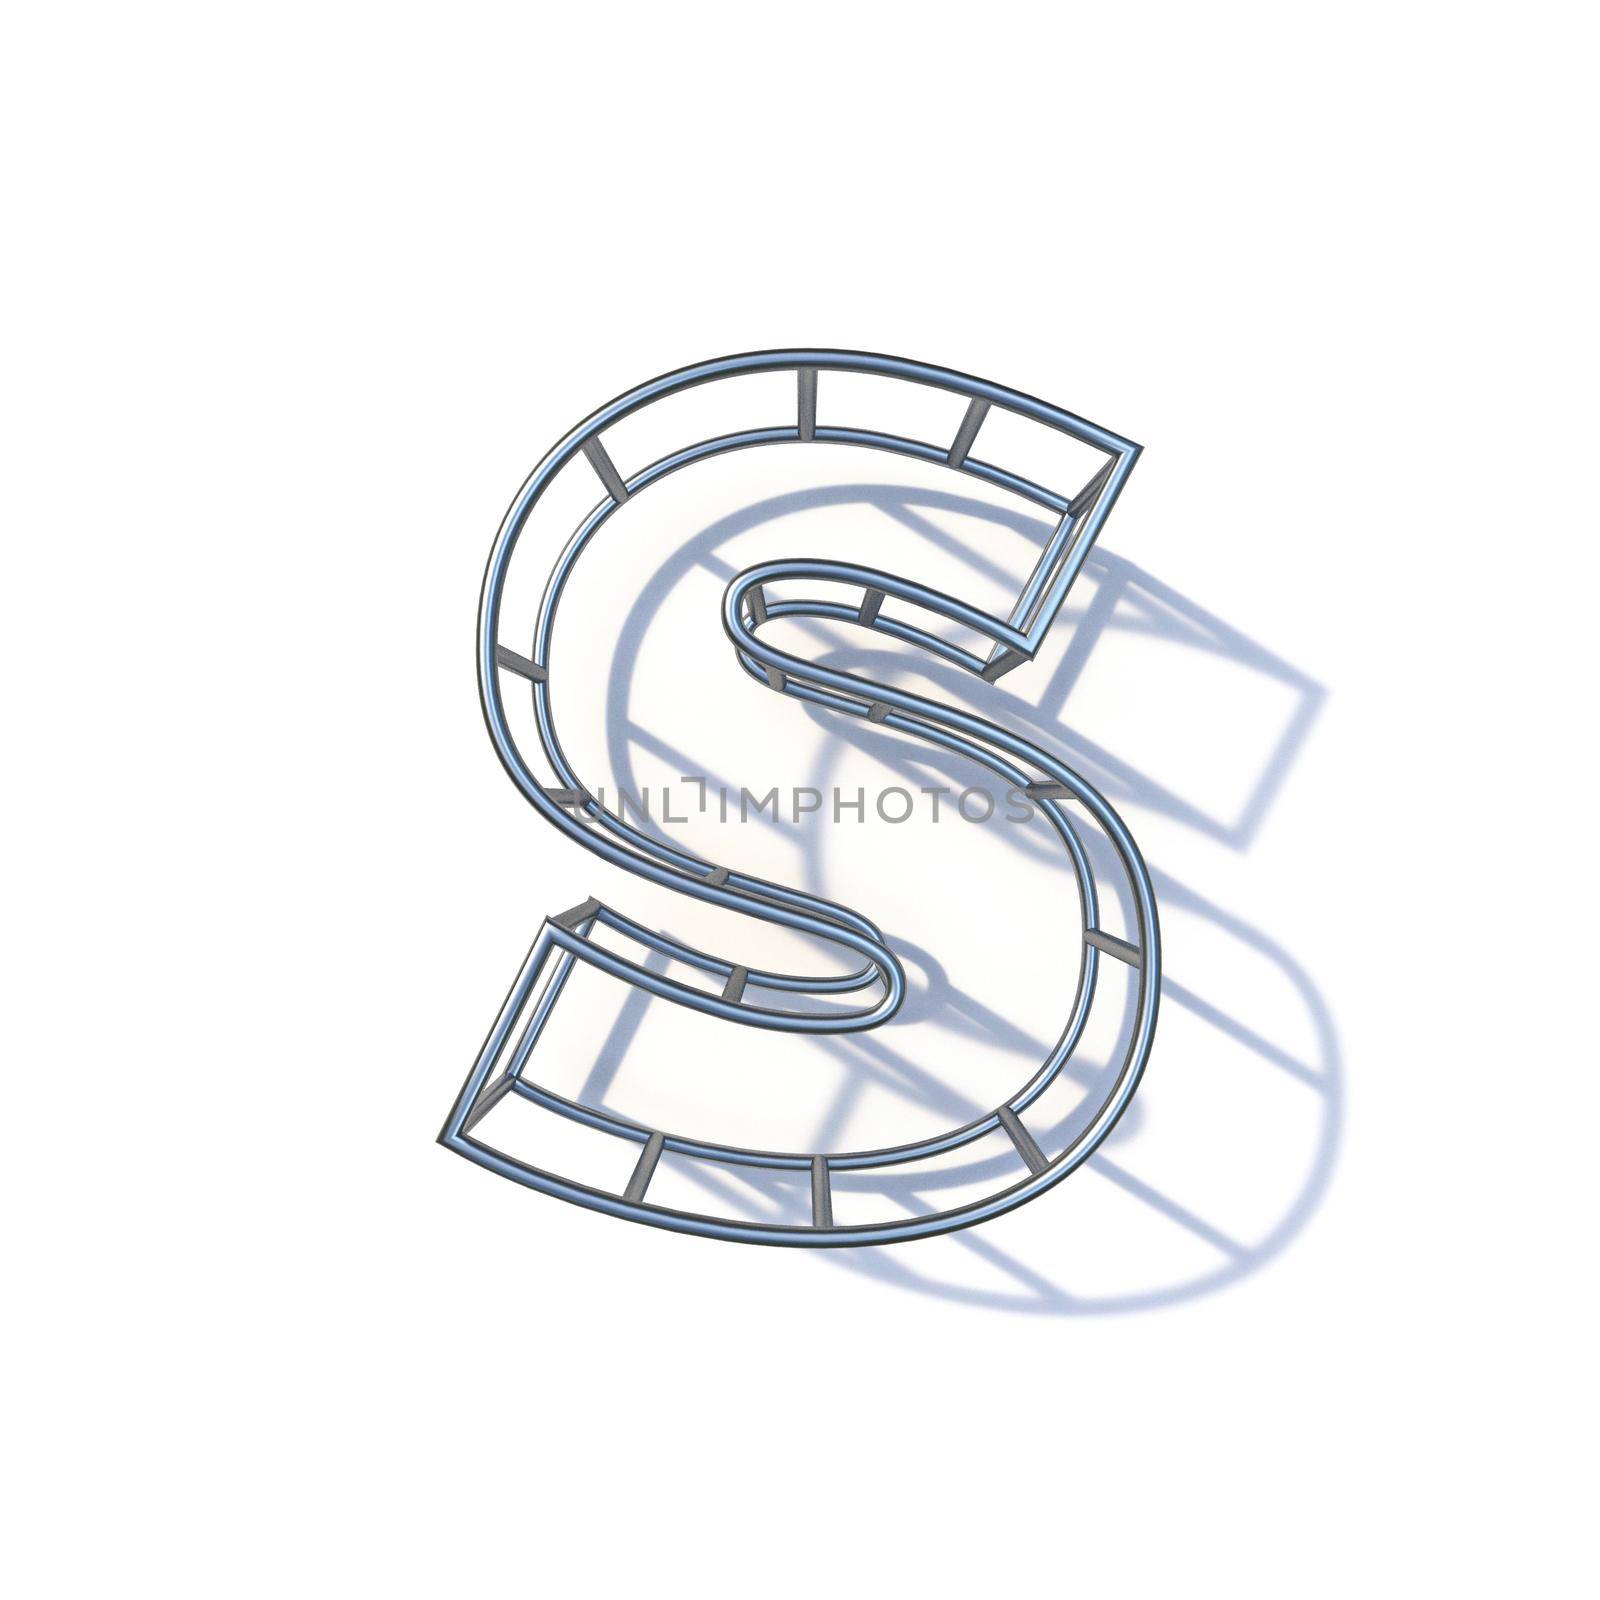 Steel wire frame font Letter S 3D by djmilic